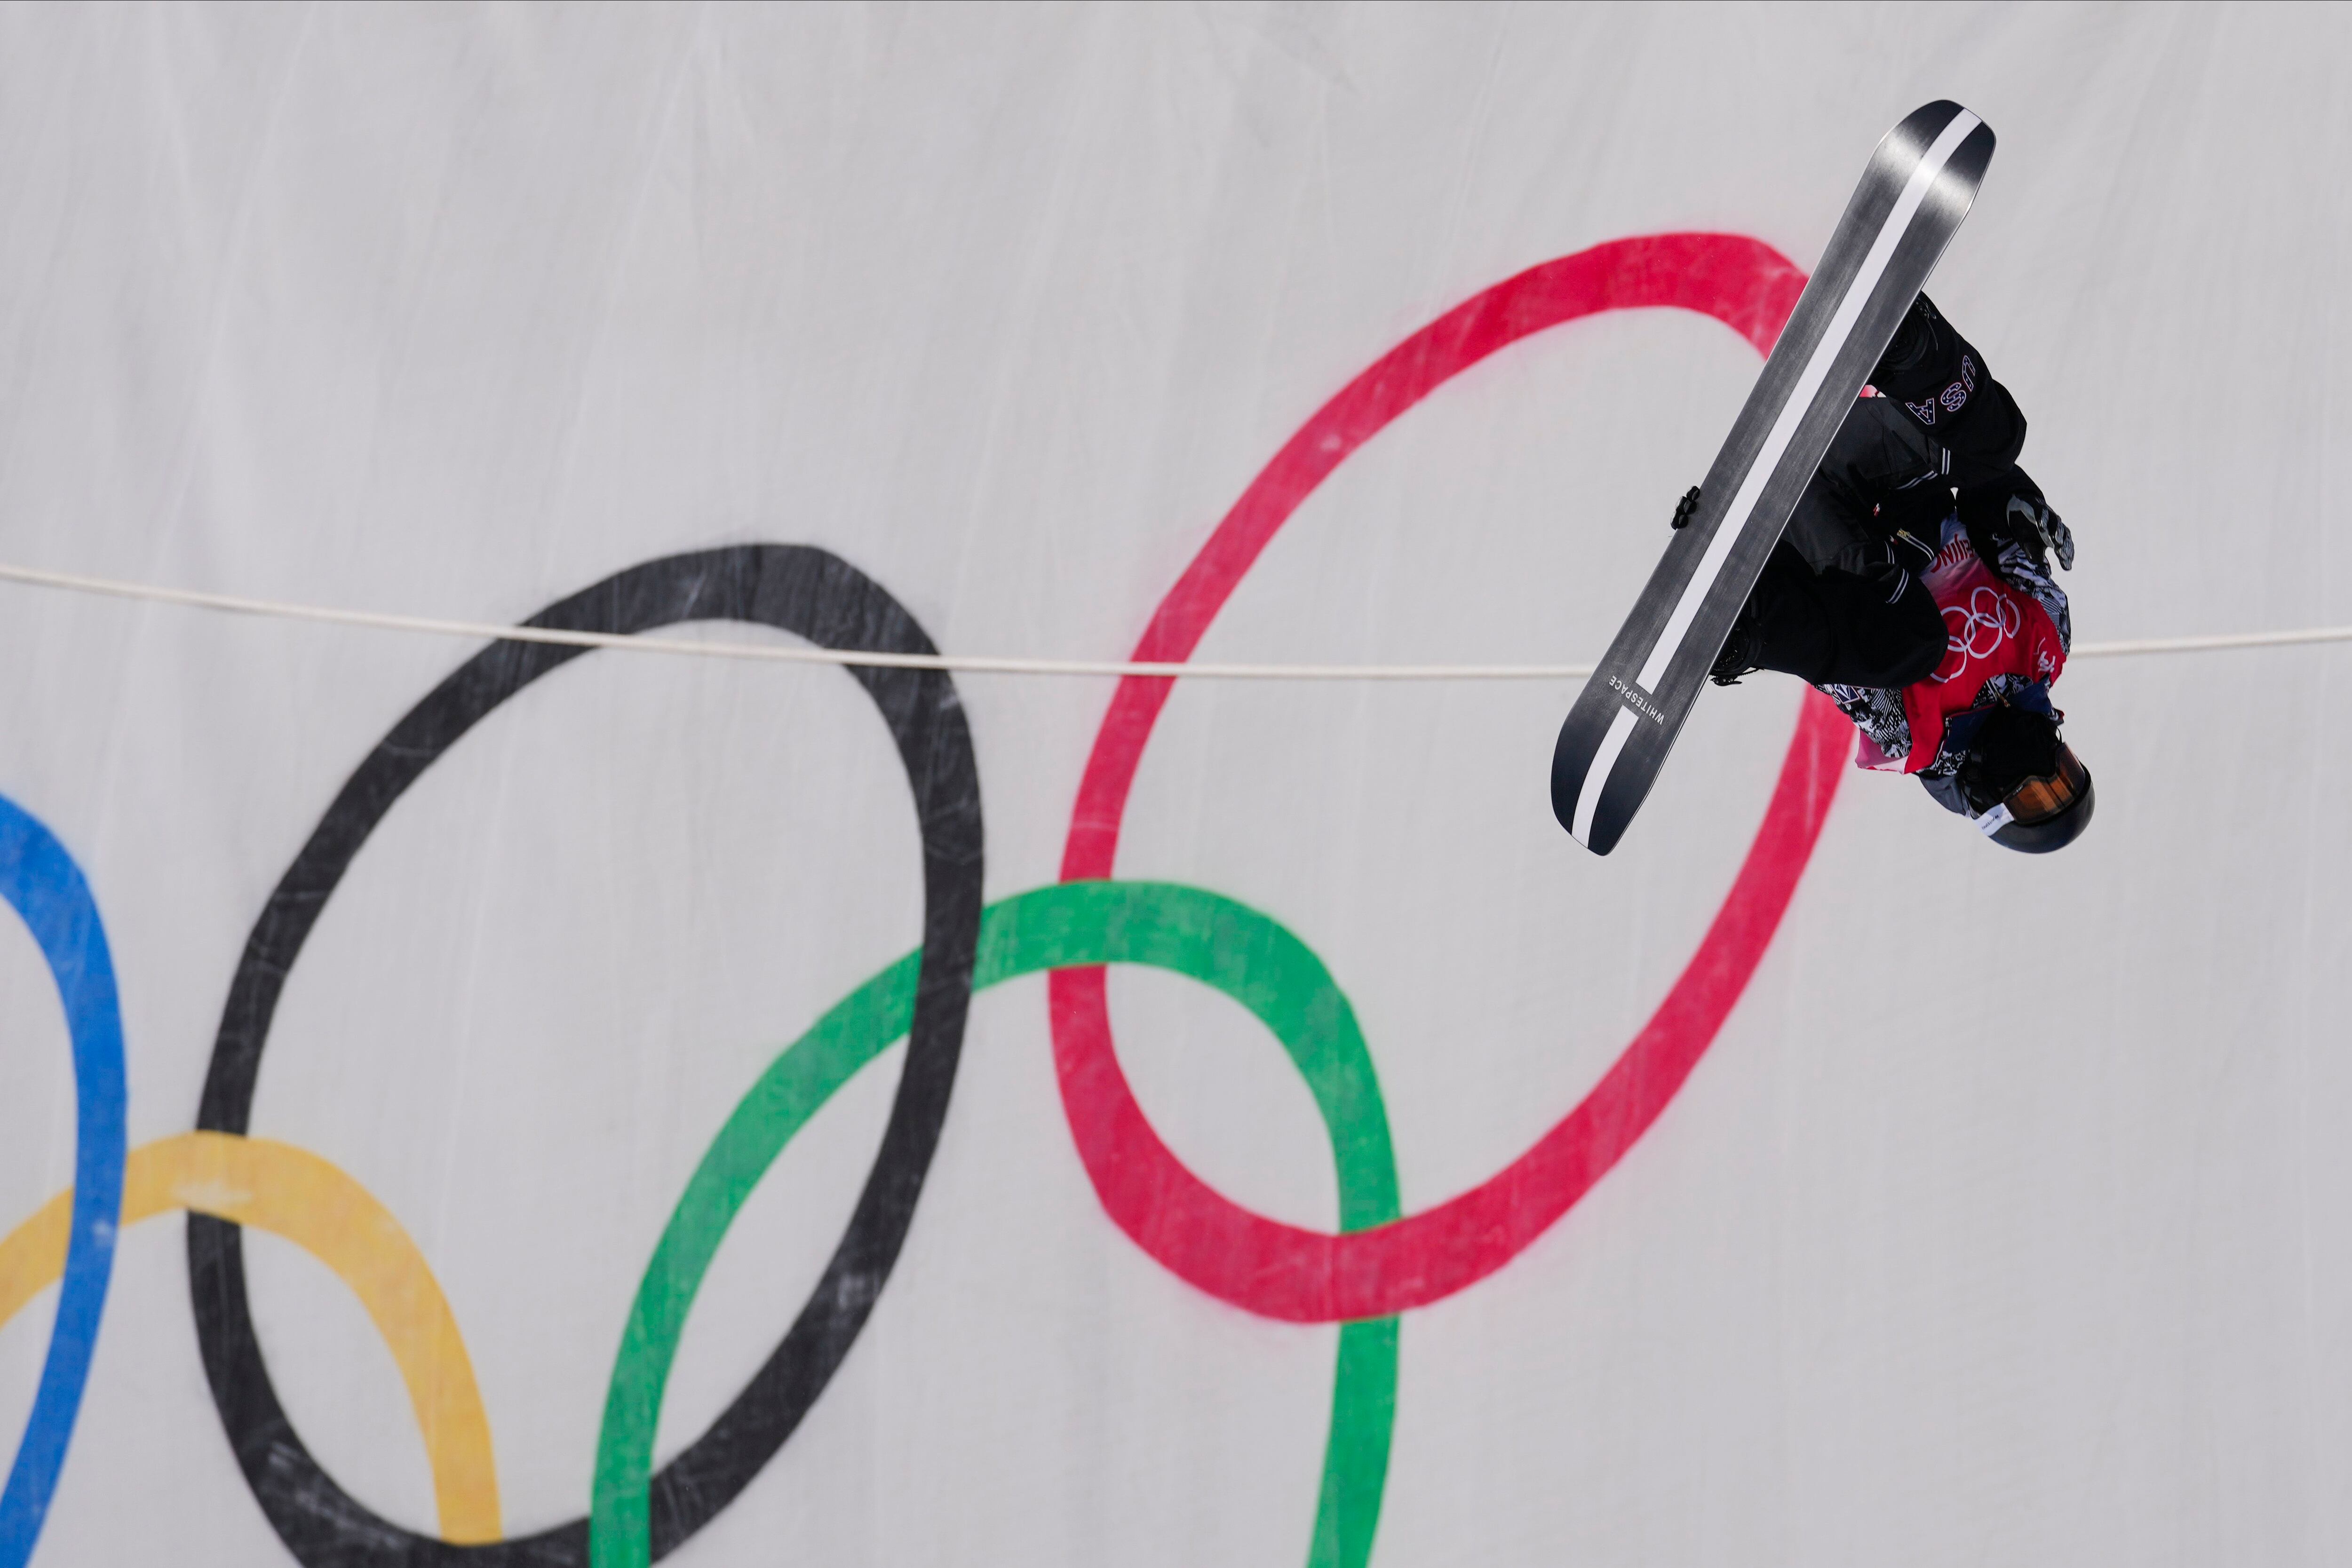 Farewell to the Flying Tomato: how Shaun White left an Olympic legacy, Winter Olympics Beijing 2022